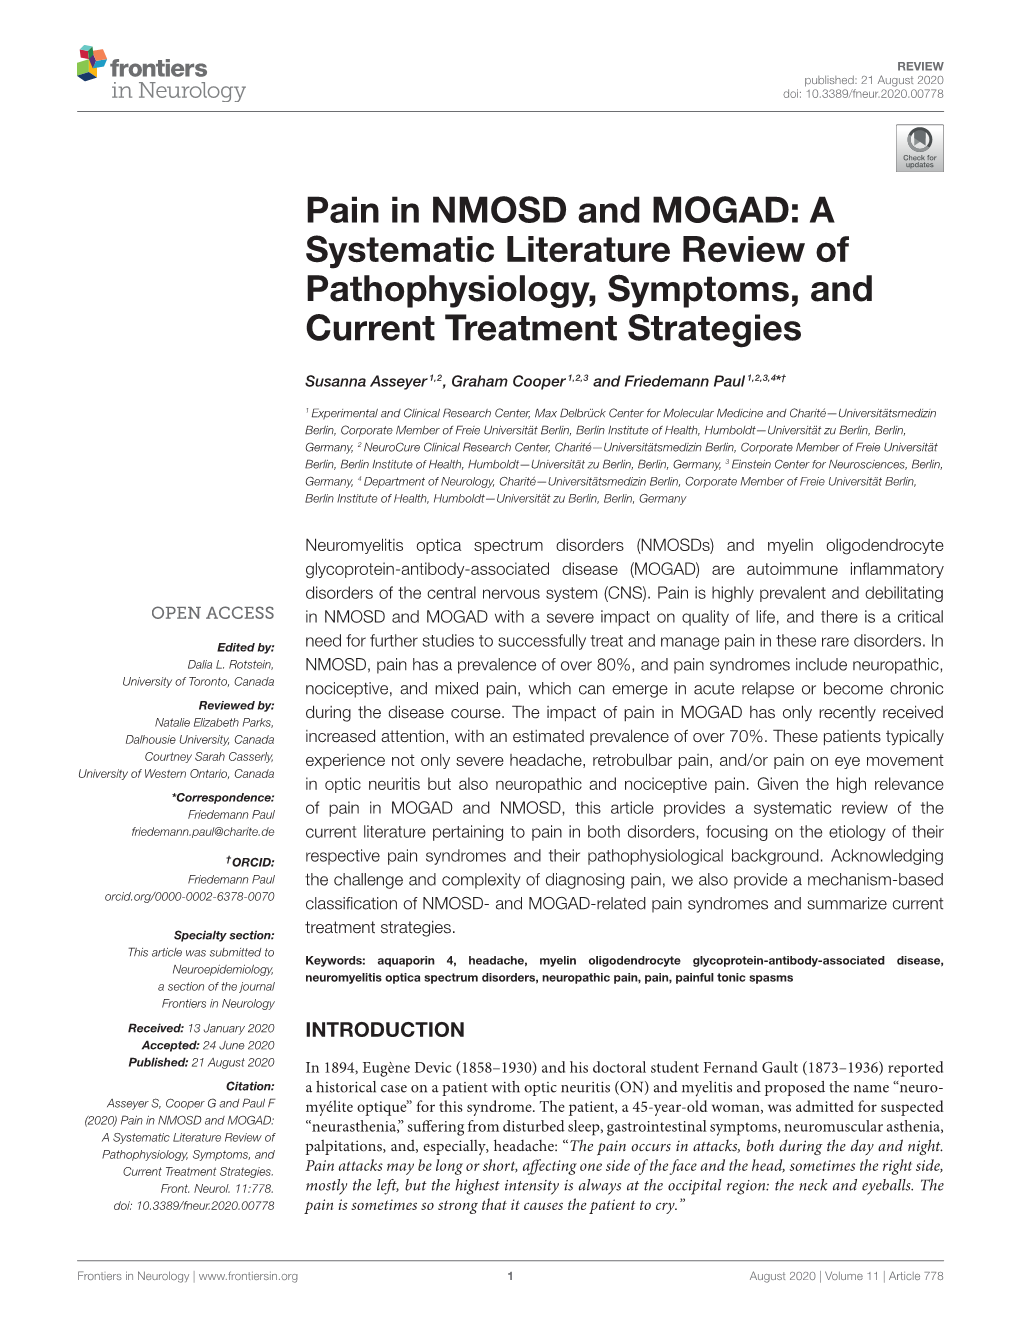 Pain in NMOSD and MOGAD: a Systematic Literature Review of Pathophysiology, Symptoms, and Current Treatment Strategies